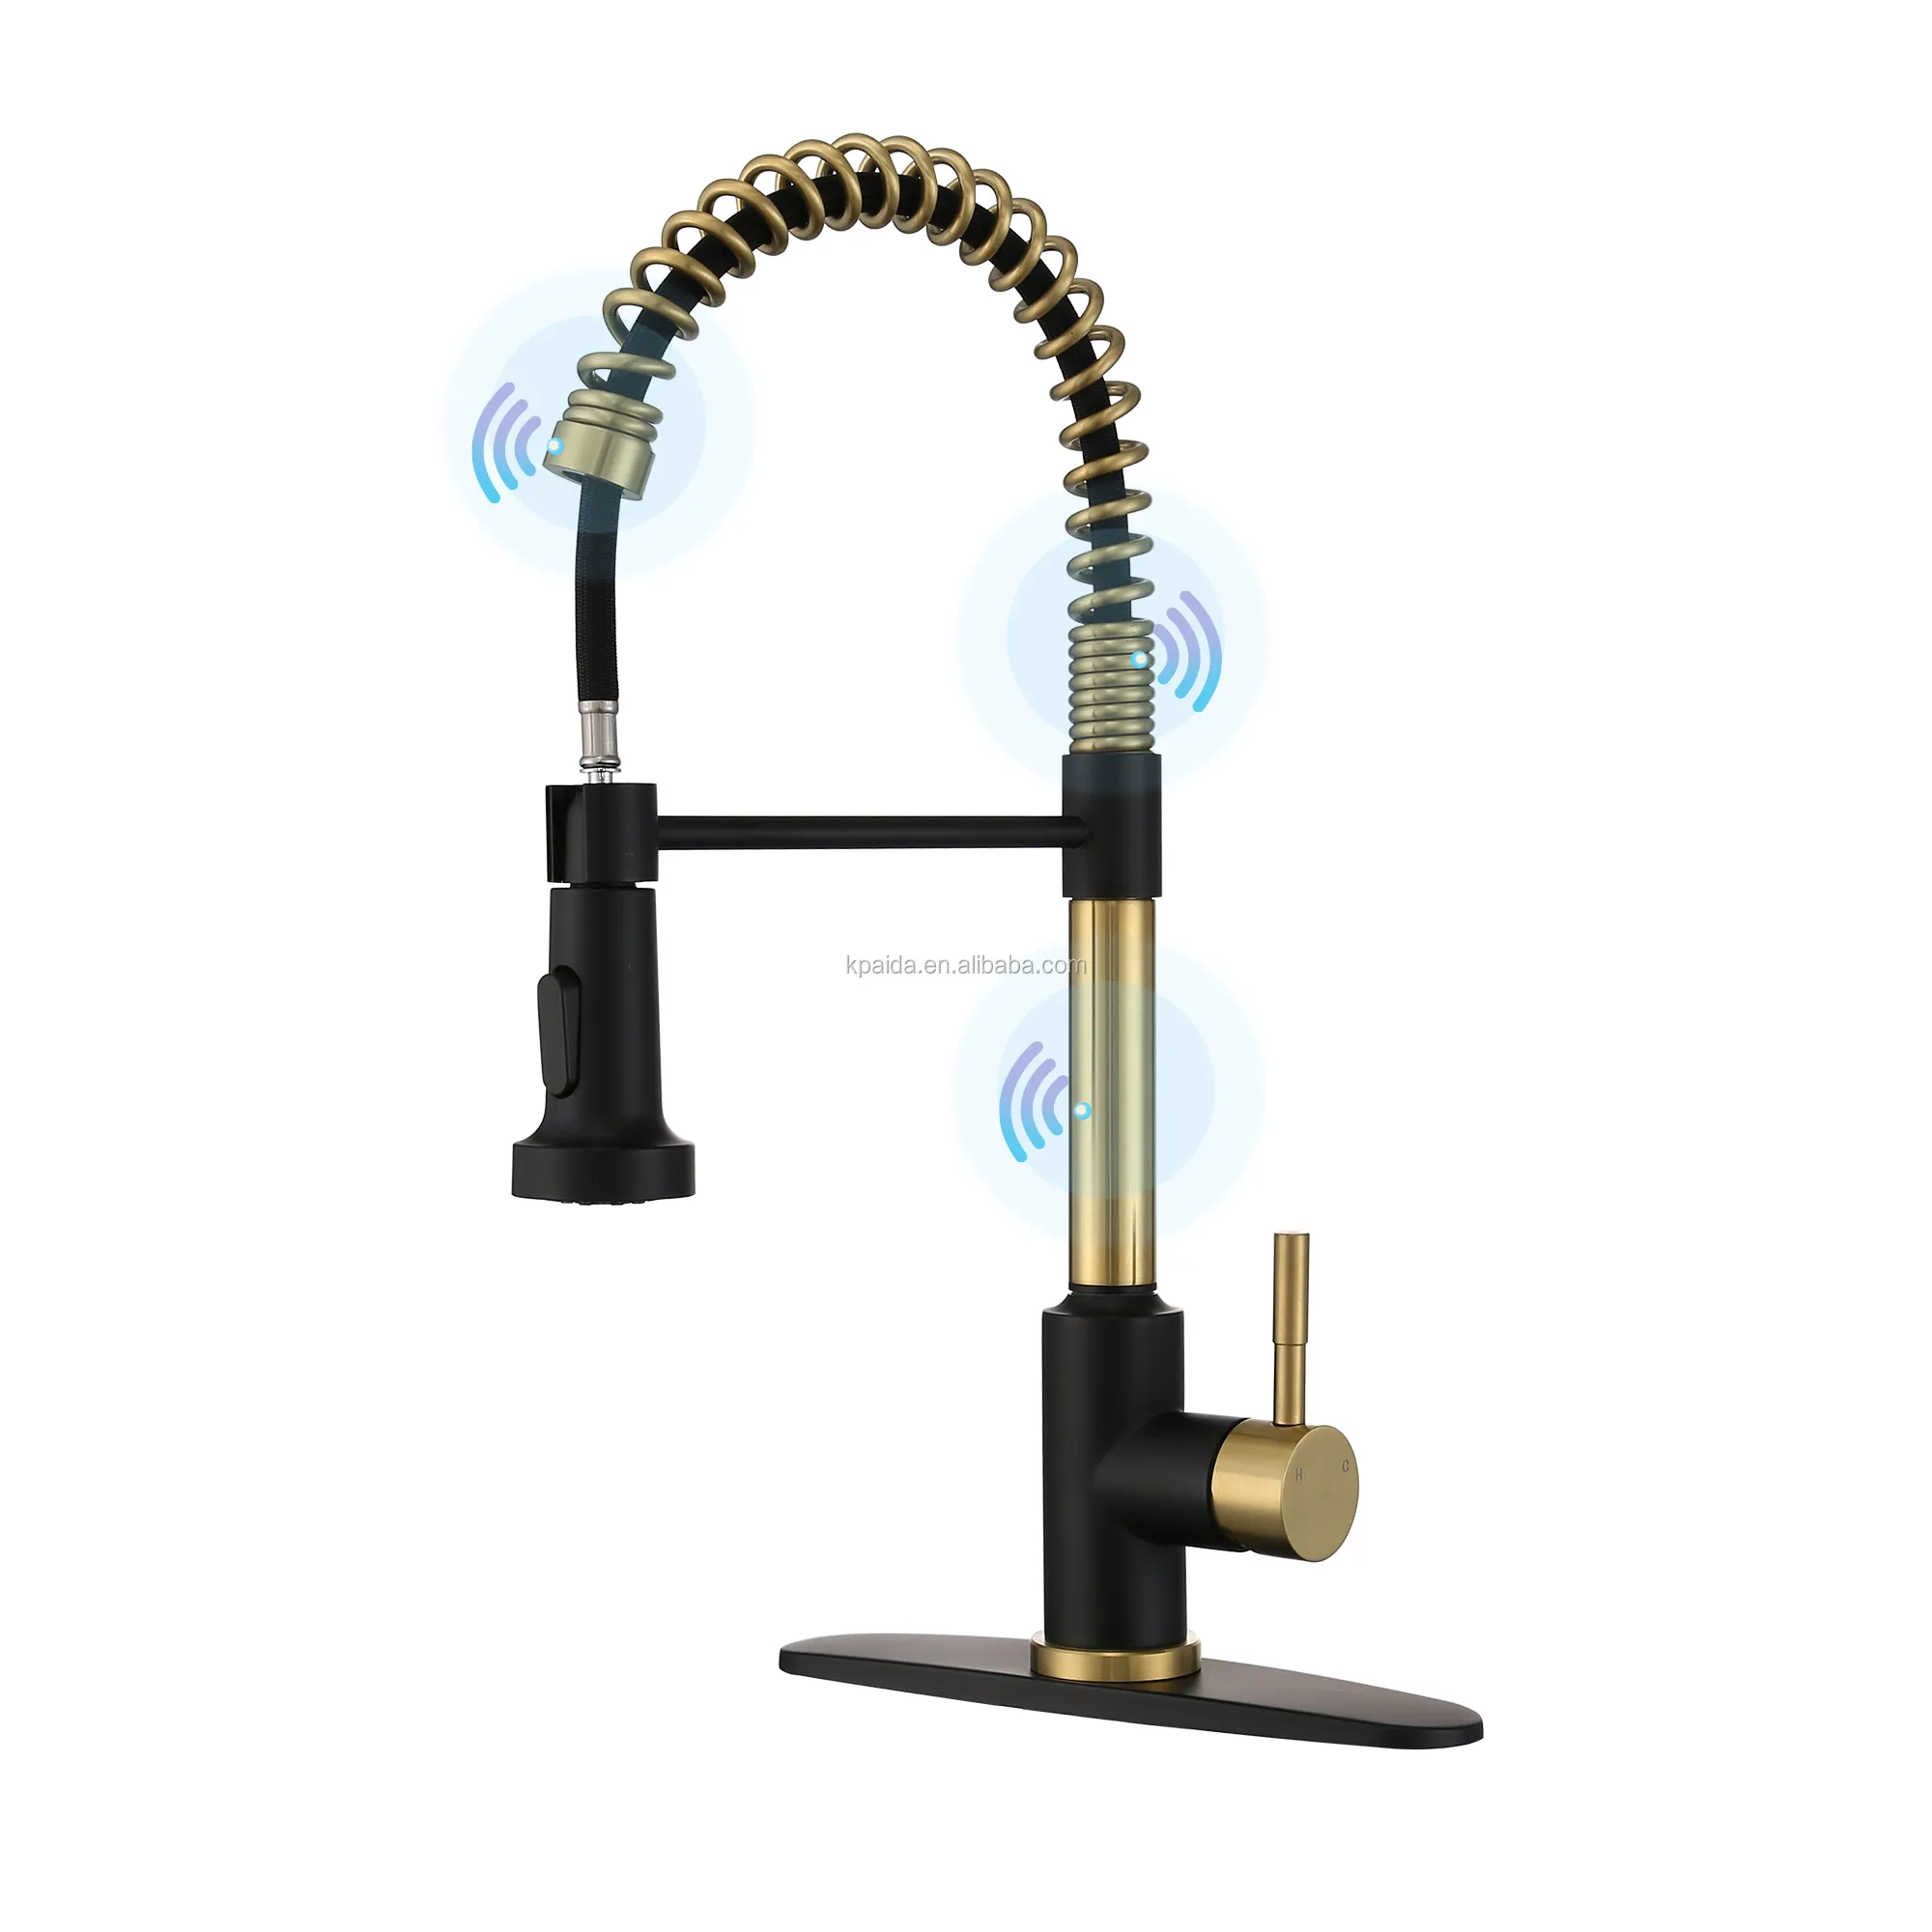 Sensor Touch Black Gold Faucet Touchless Faucet Mixer 360 Degree Rotating Spring Kitchen Faucets Hot